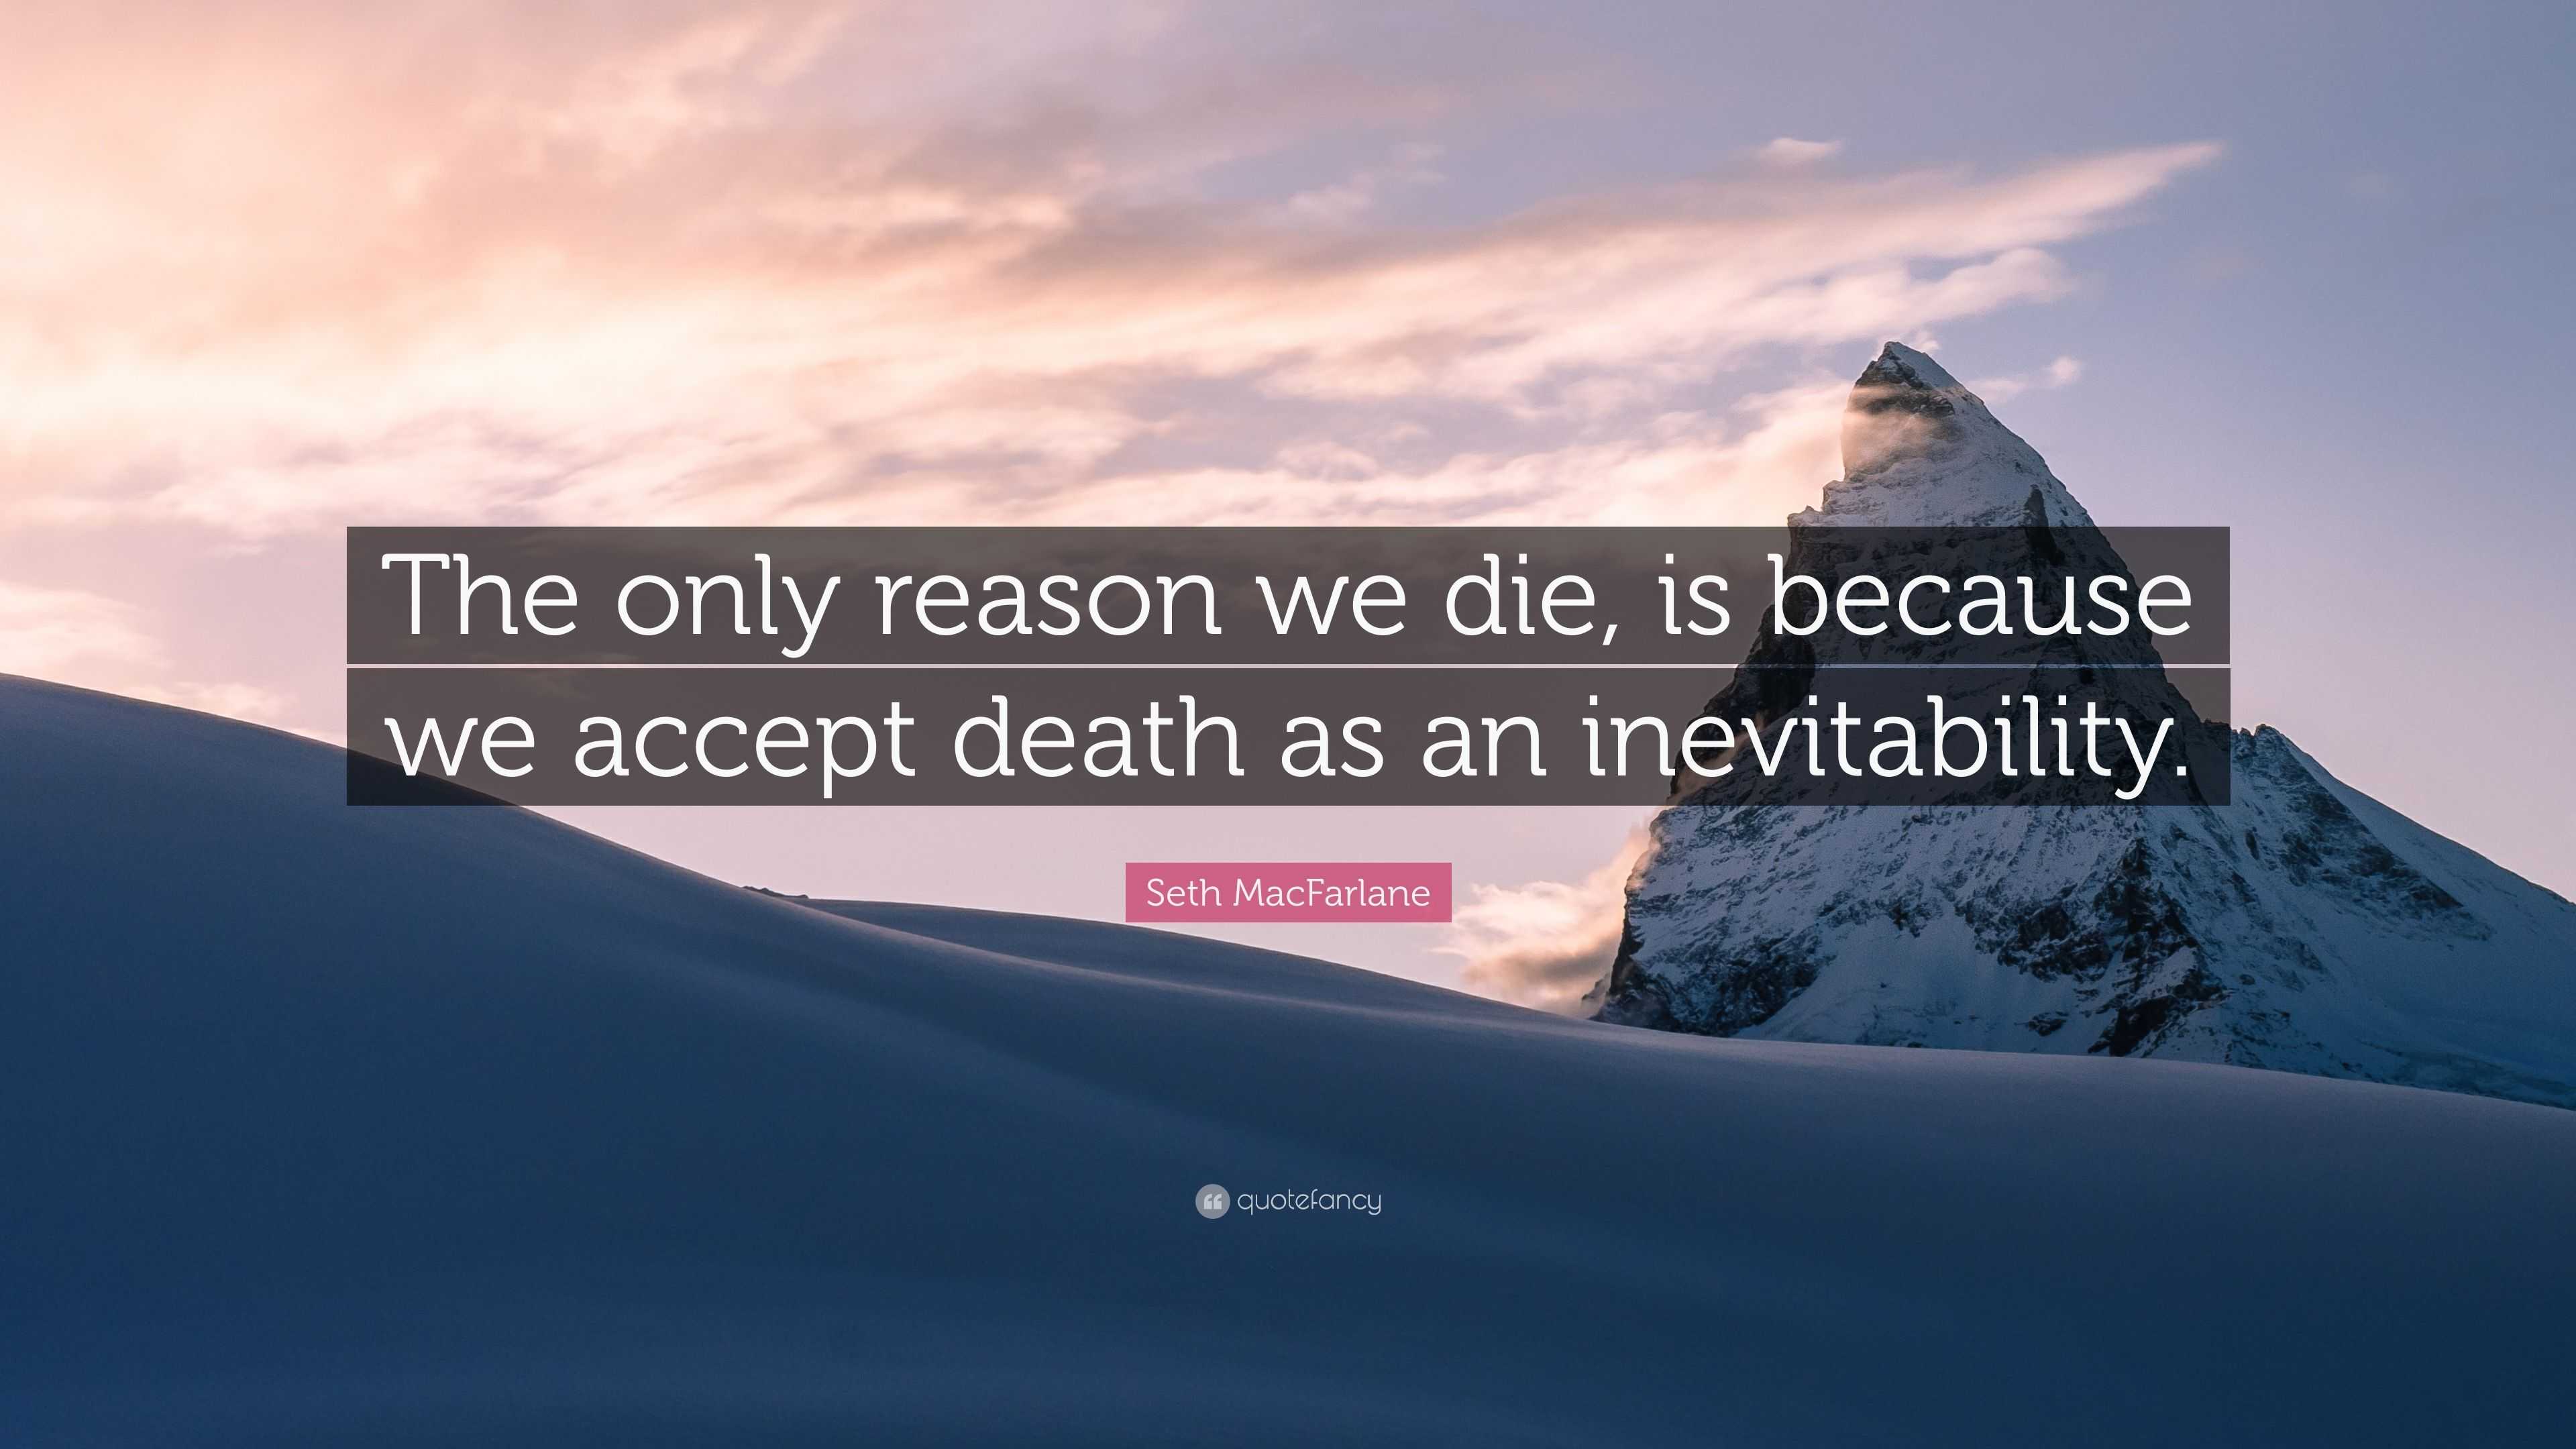 Seth MacFarlane Quote: “The only reason we die, is because we accept ...